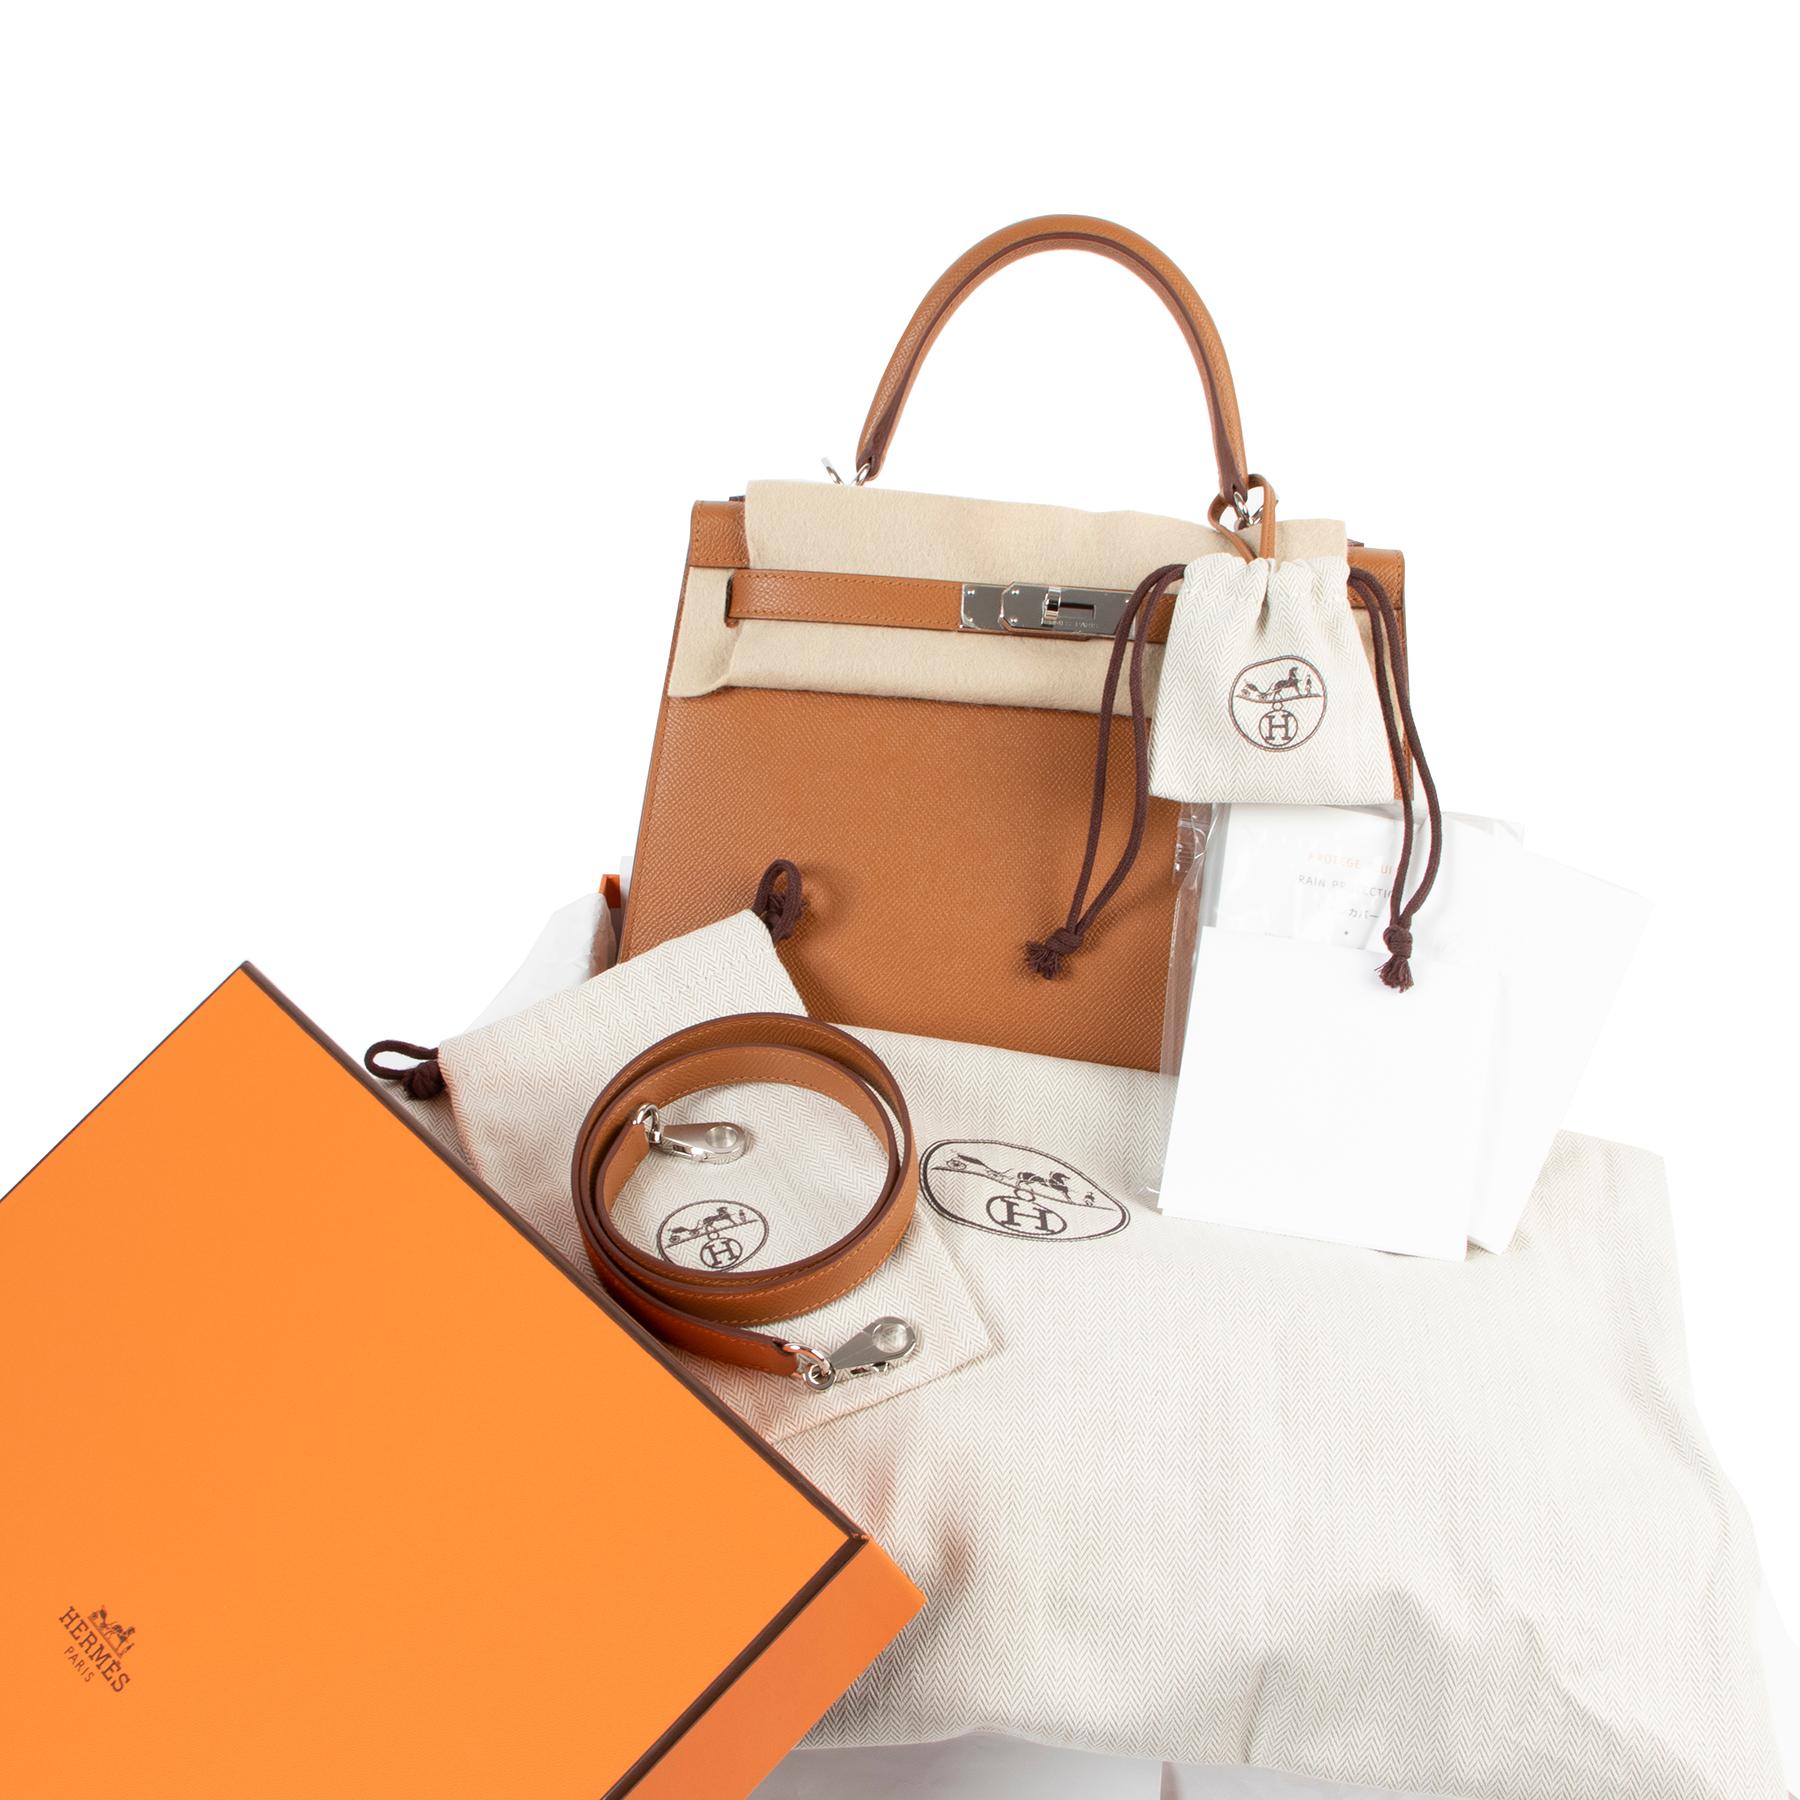 Hermès Kelly 28 Verso Gold Ambre Epsom PHW
If you're looking for that all-time classic bag with a cool and unique touch, this Hermès Kelly 28 Verso Gold Ambre Epsom PHW is the one for you. Brand new and fresh from the boutique, this beauty comes in